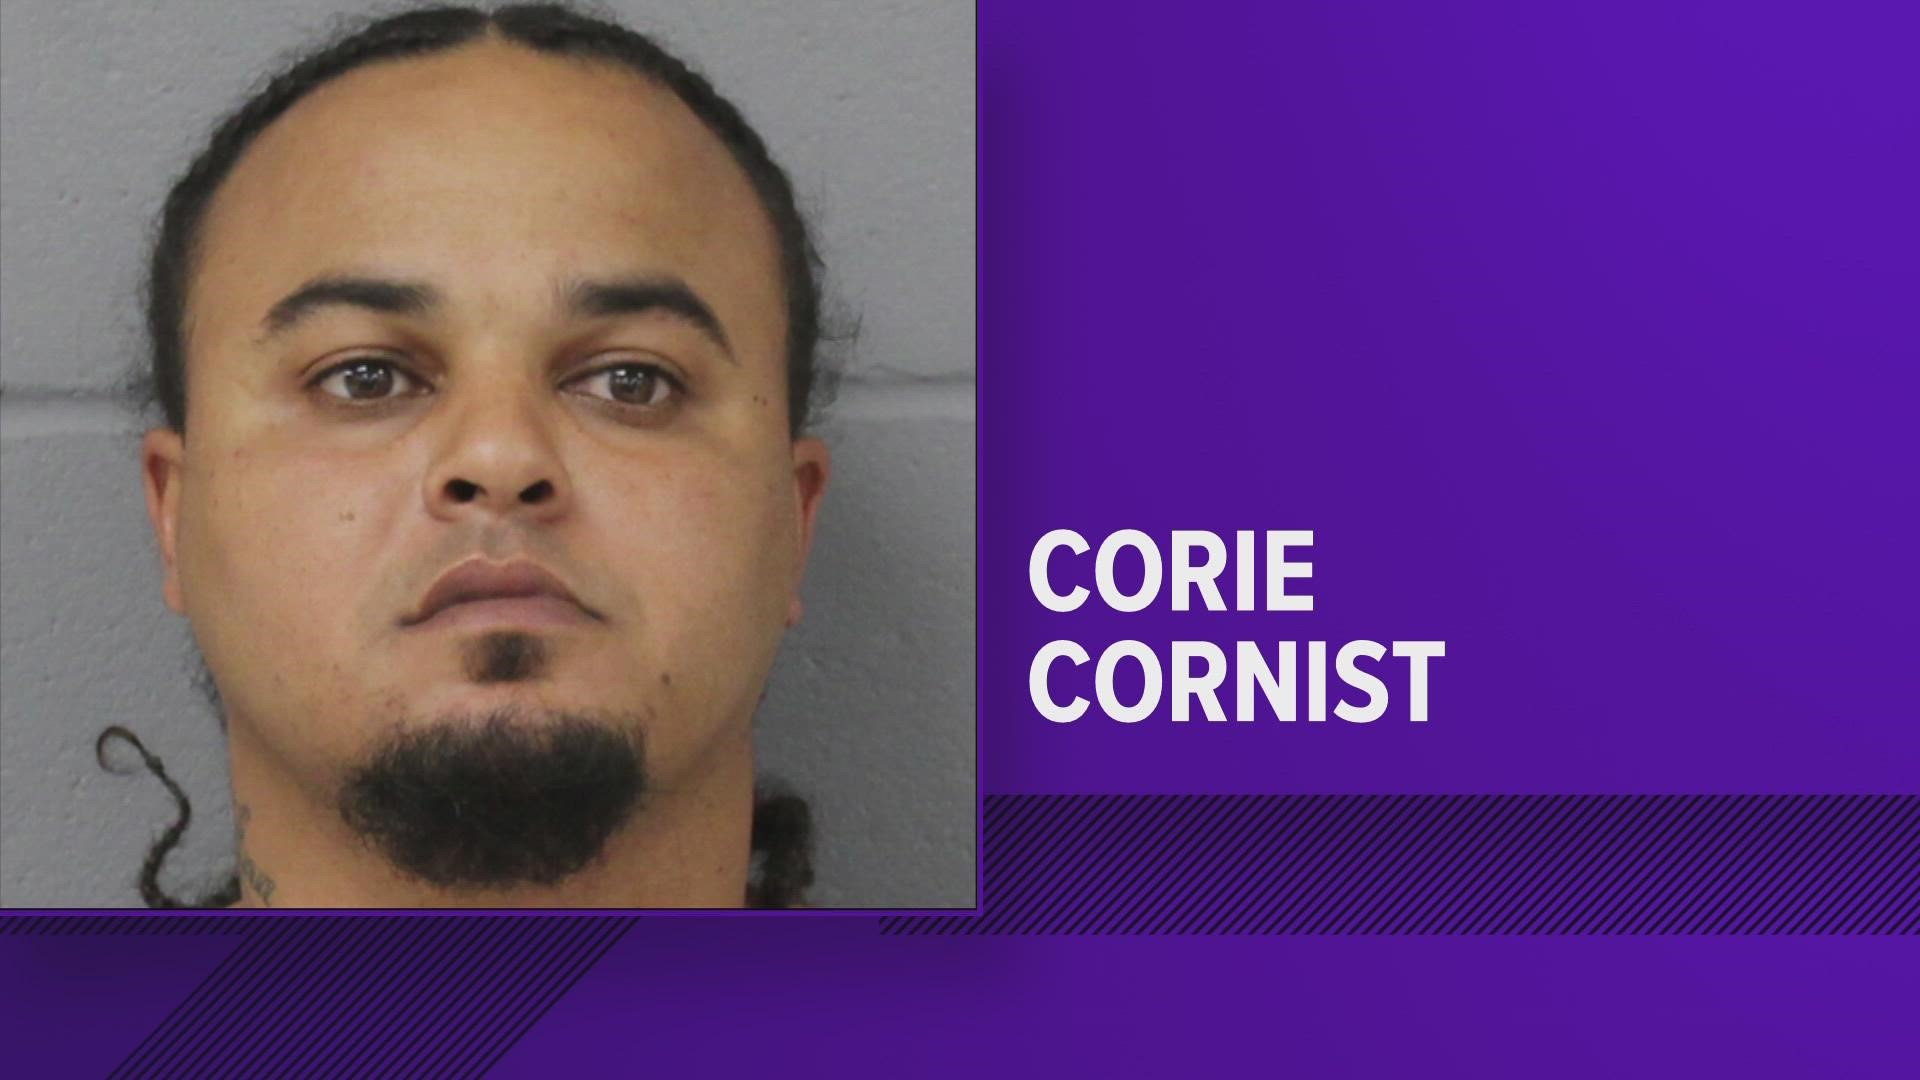 Police arrested Corie Cornist on Friday morning after an officer found a woman with serious injuries on Cedargrove Drive in southeast Austin.